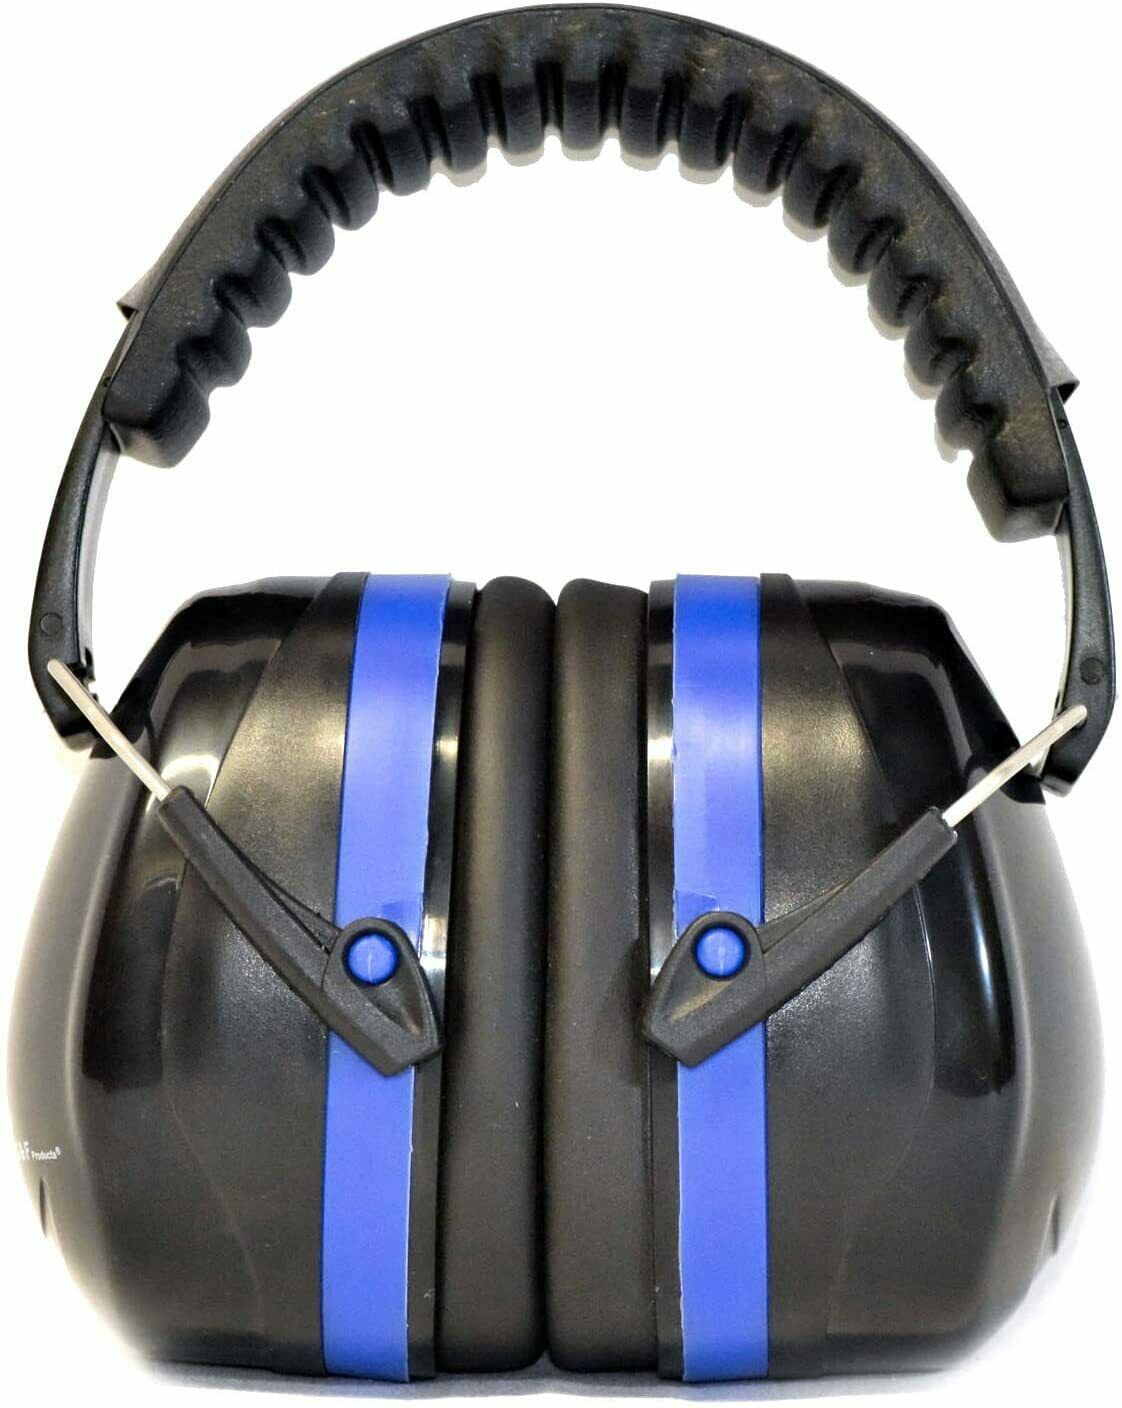 Headset Snr 34db Ear Muffs Hearing Noise Reduction Protection Shooting Safety